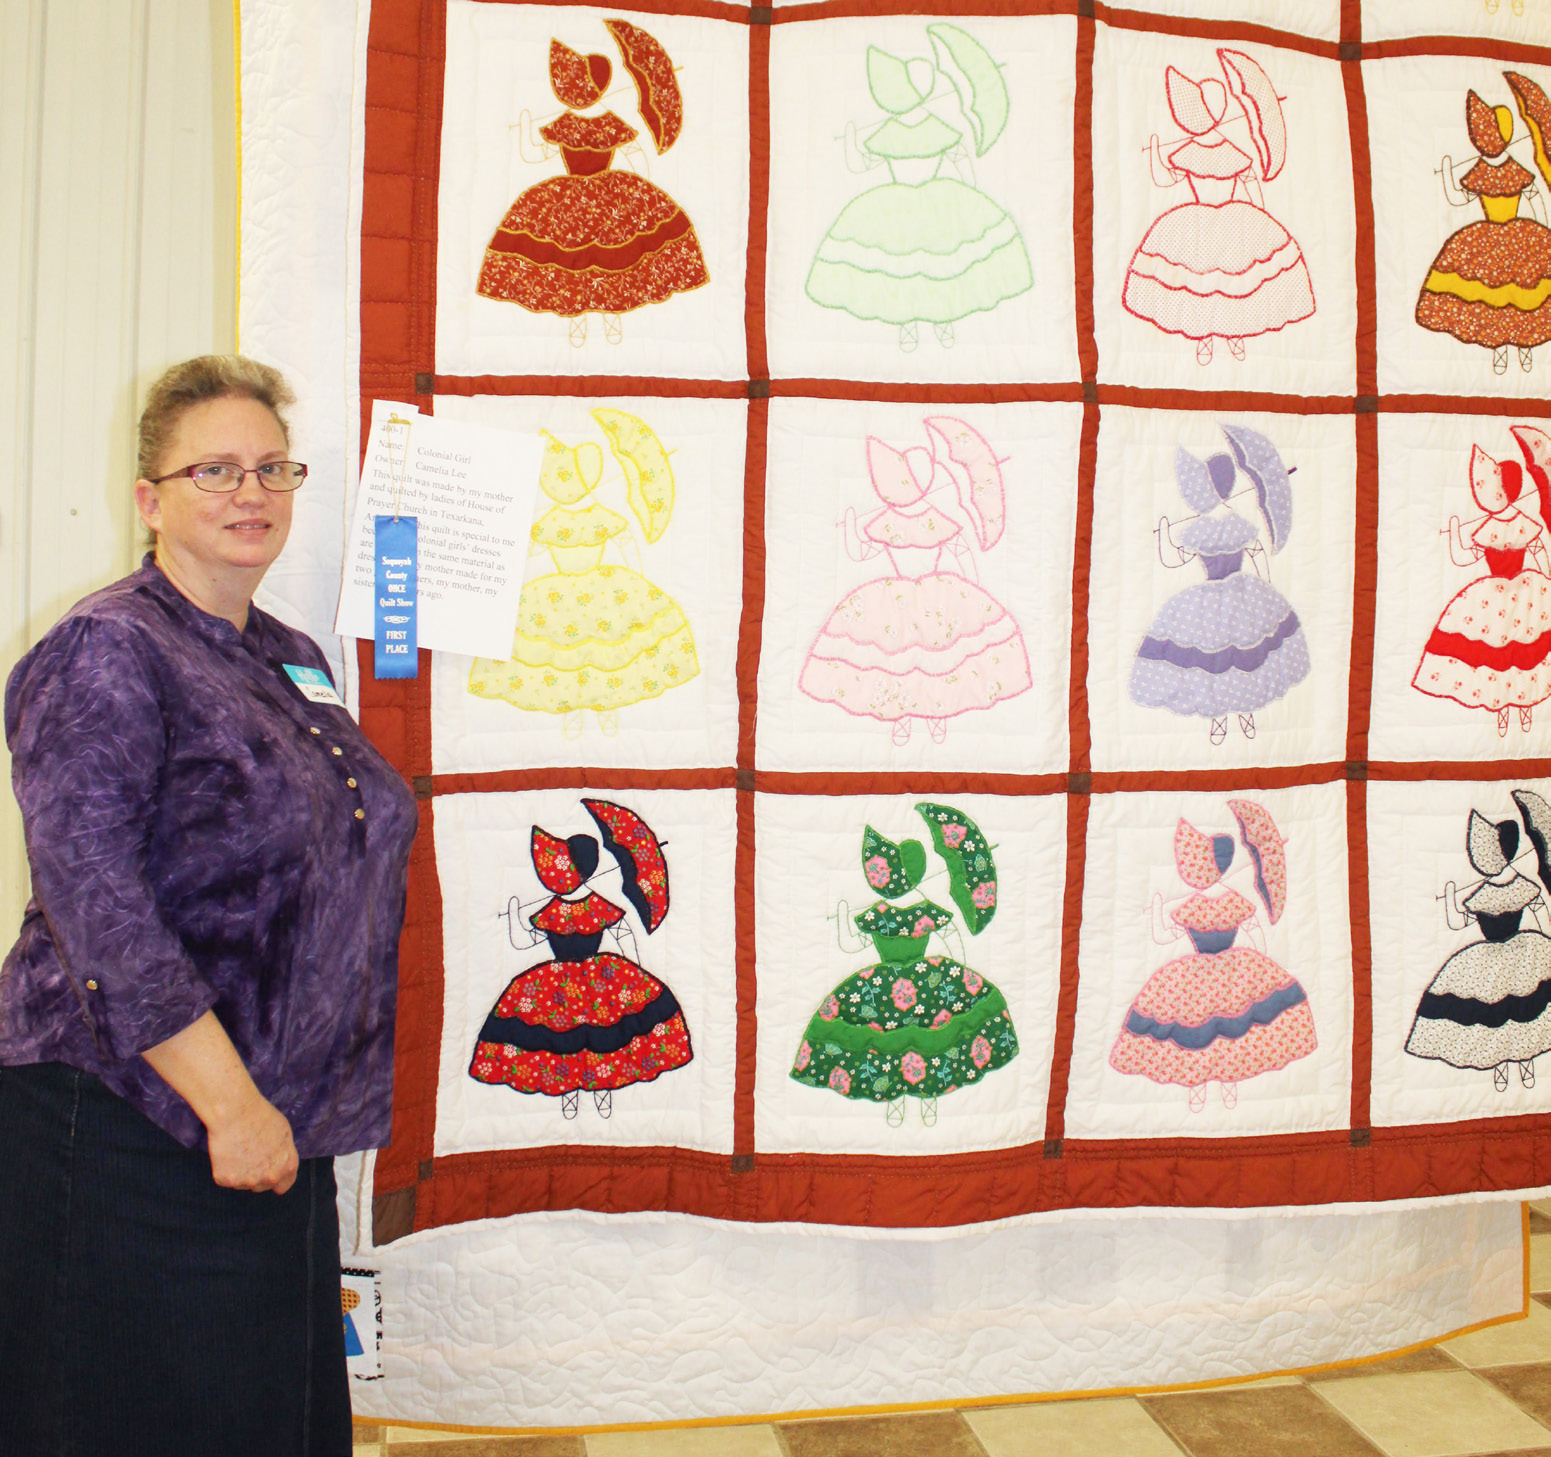 Camelia Lee is pictured with her antique quilt “Colonial Girl” which received a blue ribbon in this year’s annual OHCE Quilt Show. Lee said the quilt was made by her mother and quilted by the ladies of House of Prayer in Texarkana. “This quilt is special to me because the Colonial girls’ dresses are made from the same material as dresses that my mother made for my two grandmothers, my mother and my sister,” Lee said.